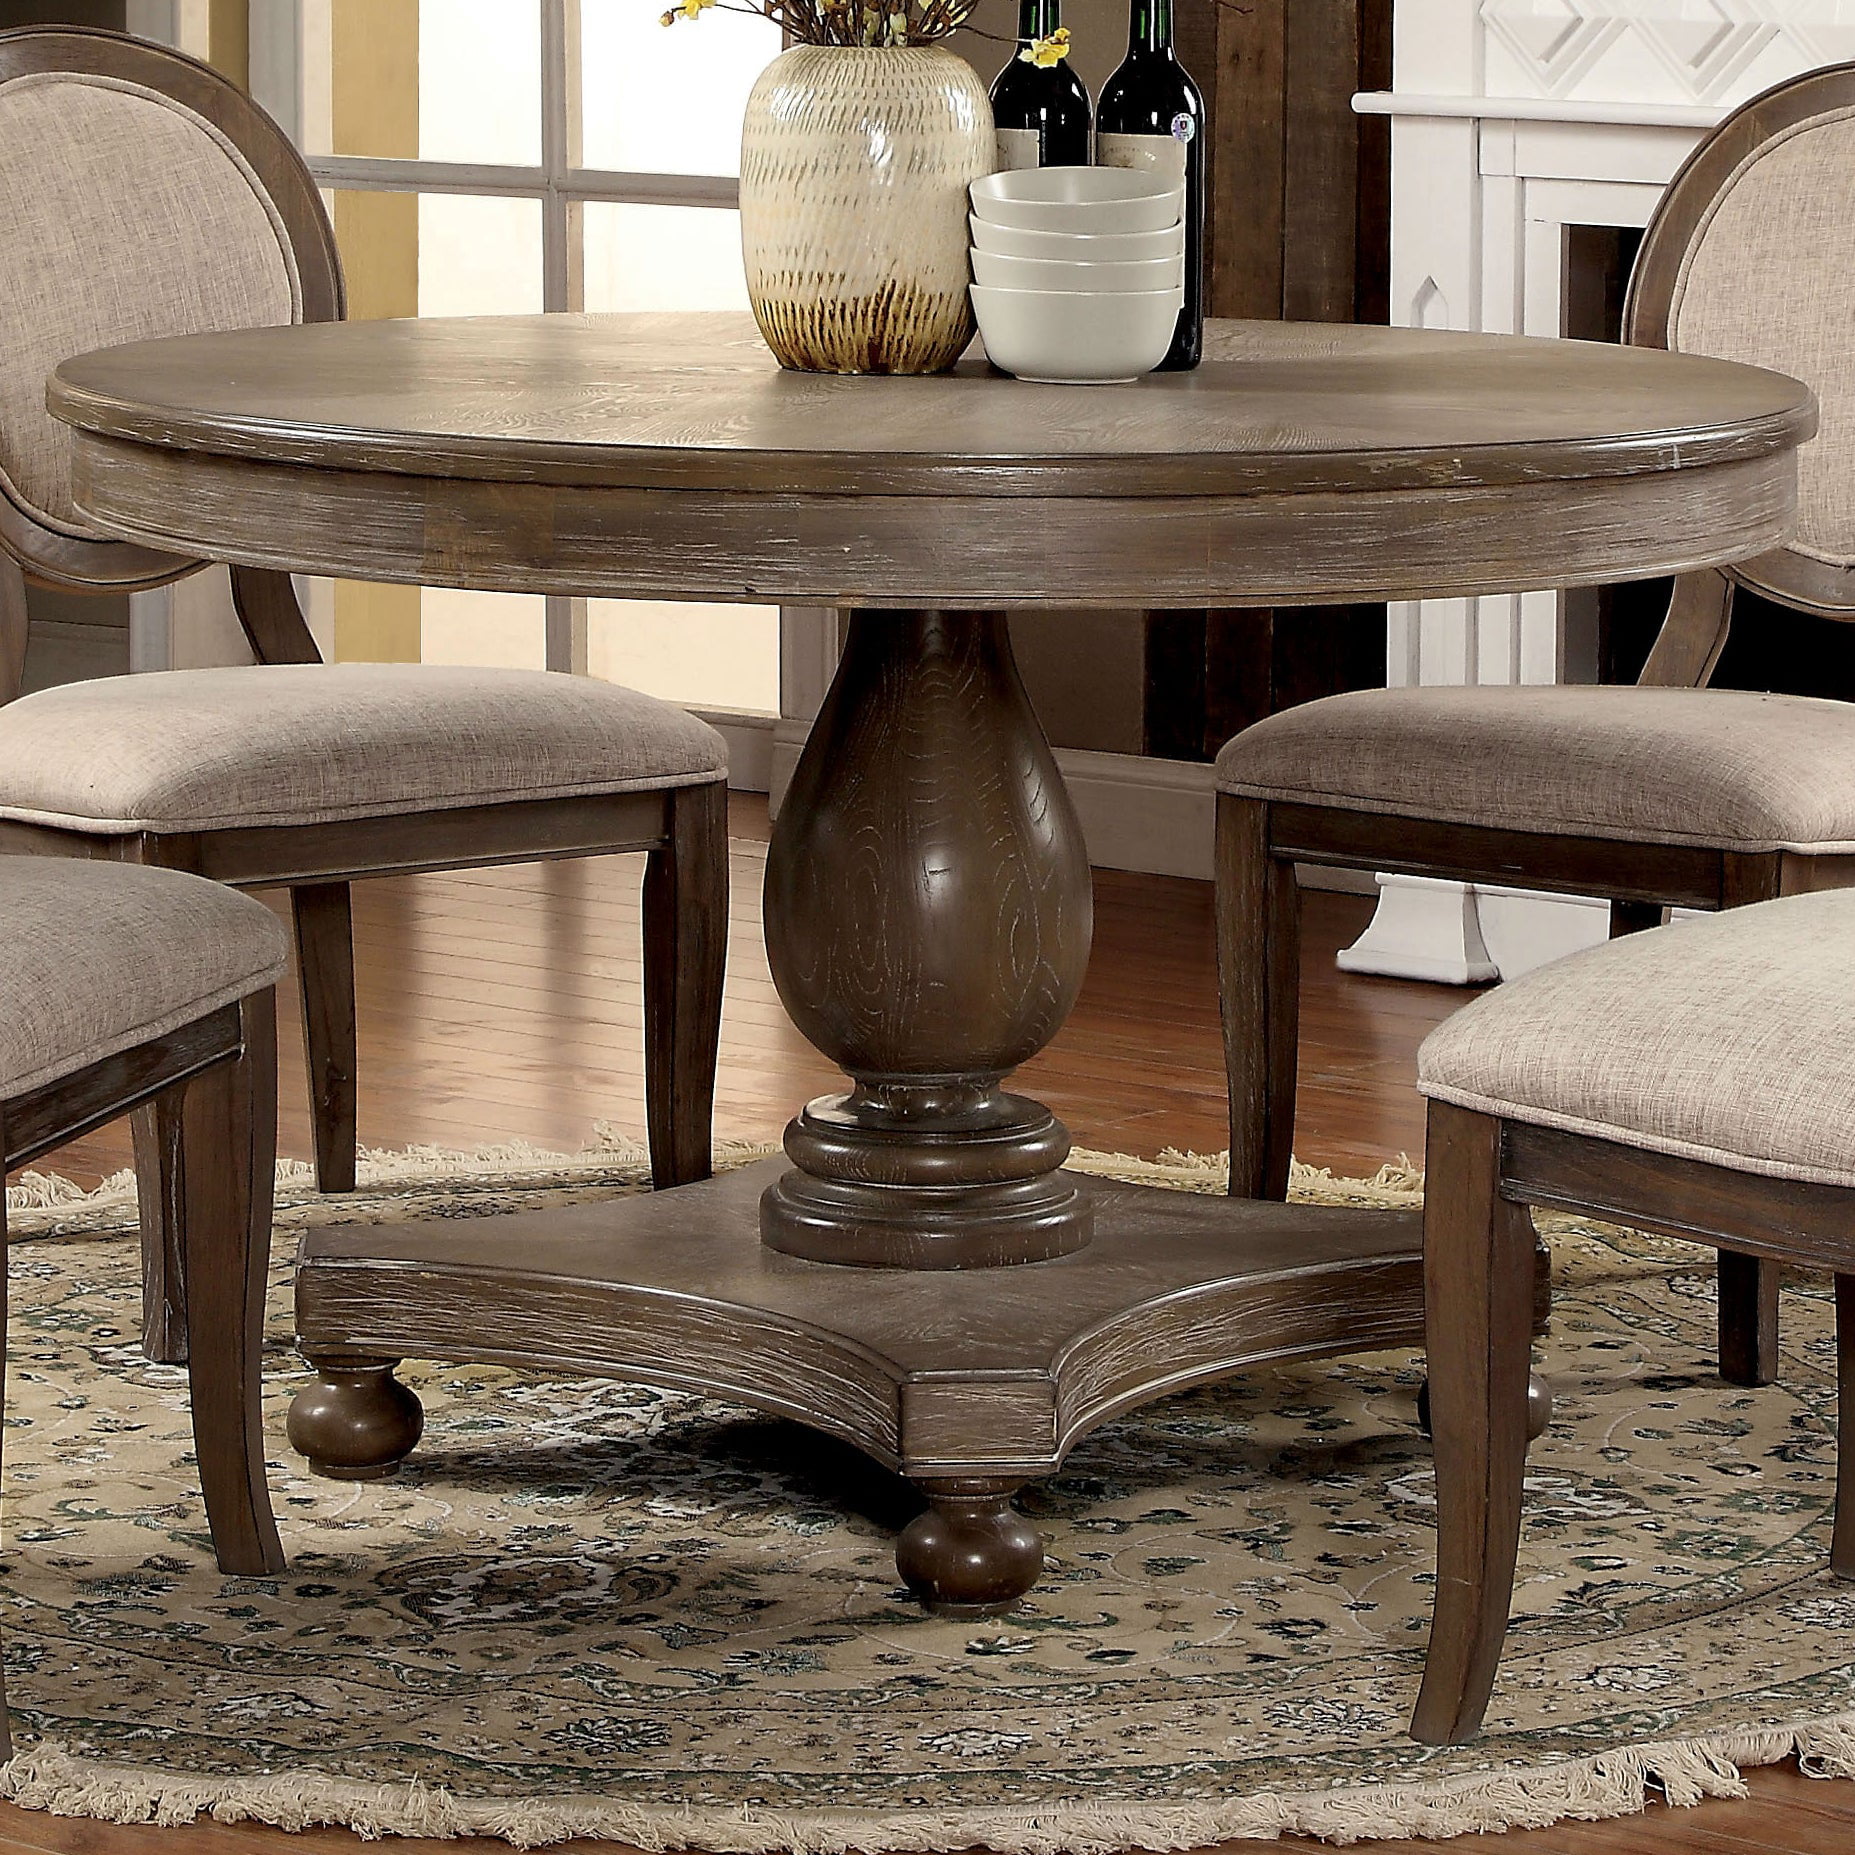 The Gray Barn Louland Falls Rustic 48, 48 Inch Round Kitchen Table And Chairs